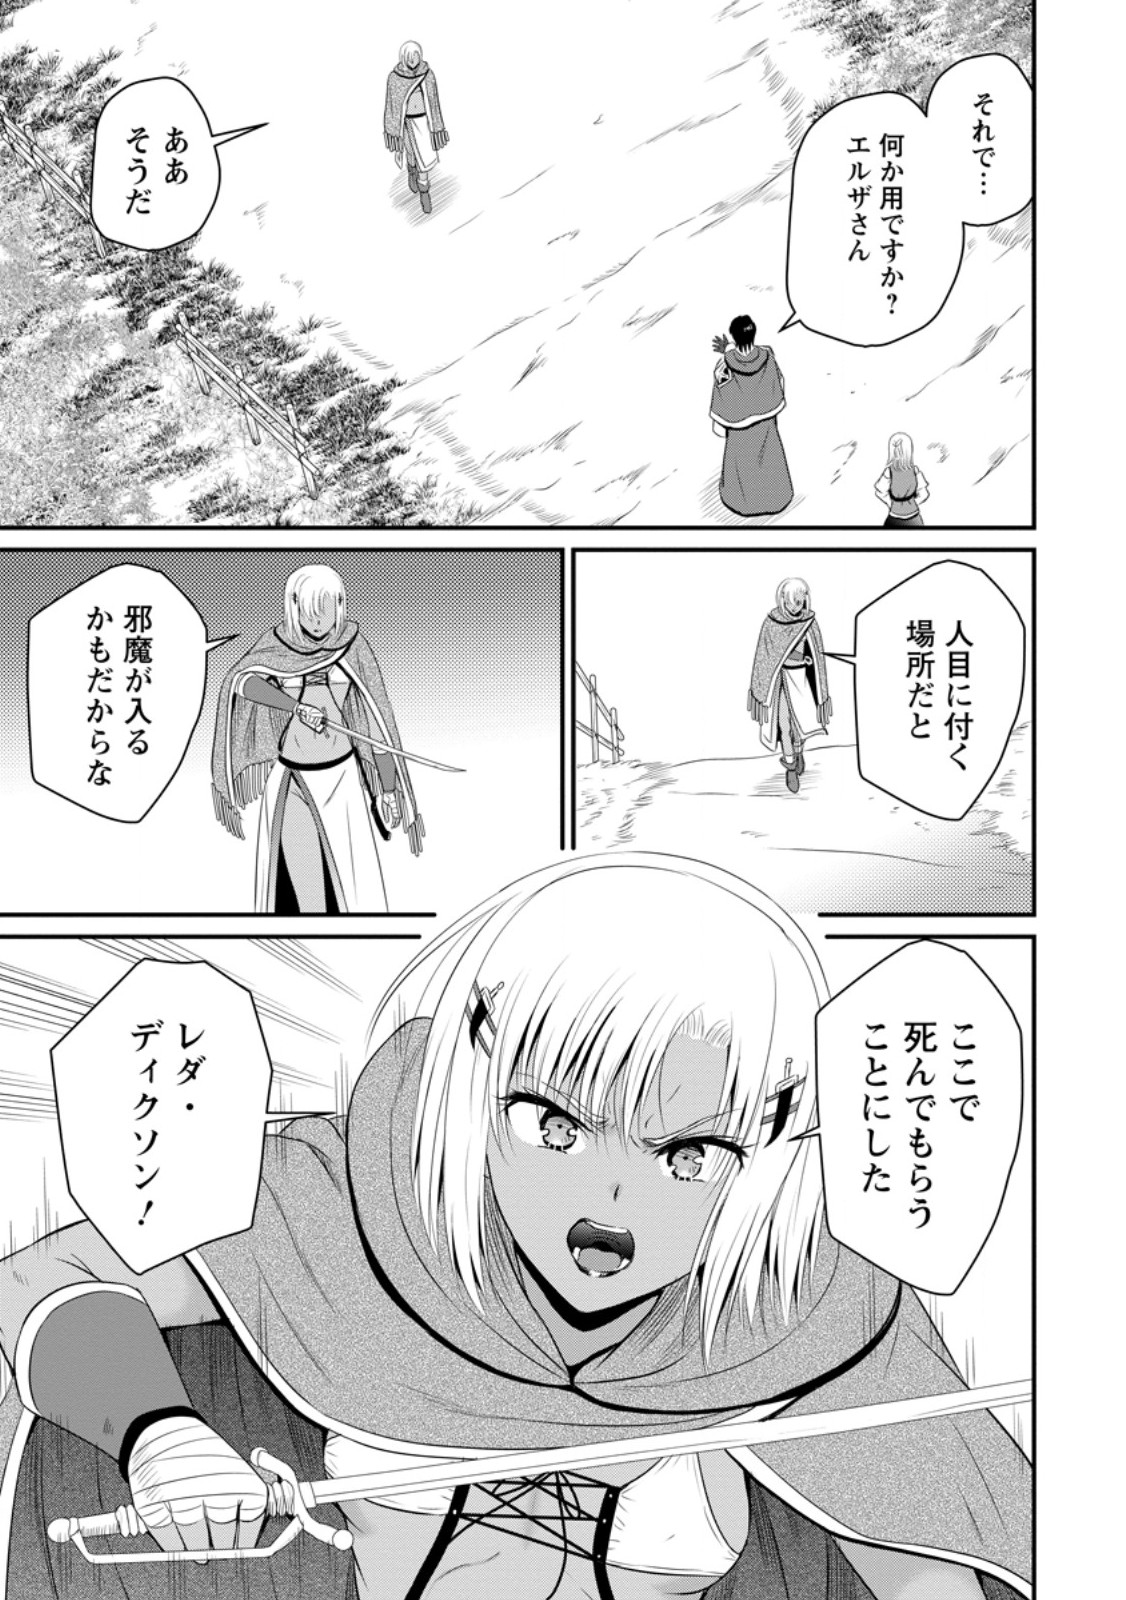 The Frontier Life of The Low-Class Ossan Healer And The Lovery Girl - Chapter 46.1 - Page 9